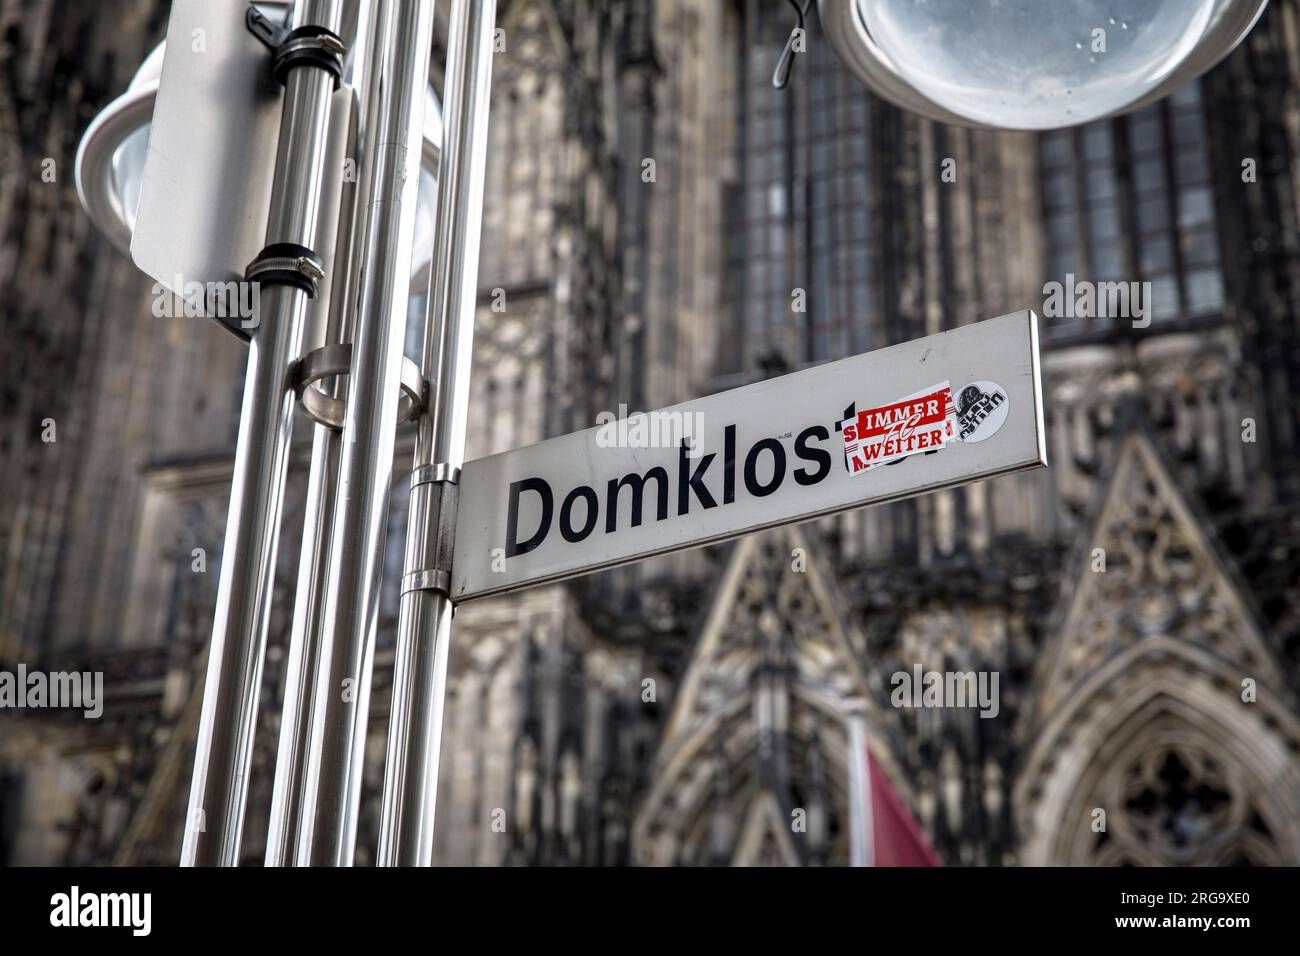 street sign of  the street Domkloster (Cathedral Monastery) is renamed with a sticker to Domklos, which means cathedral toilet, Cologne, Germany. Stra Stock Photo